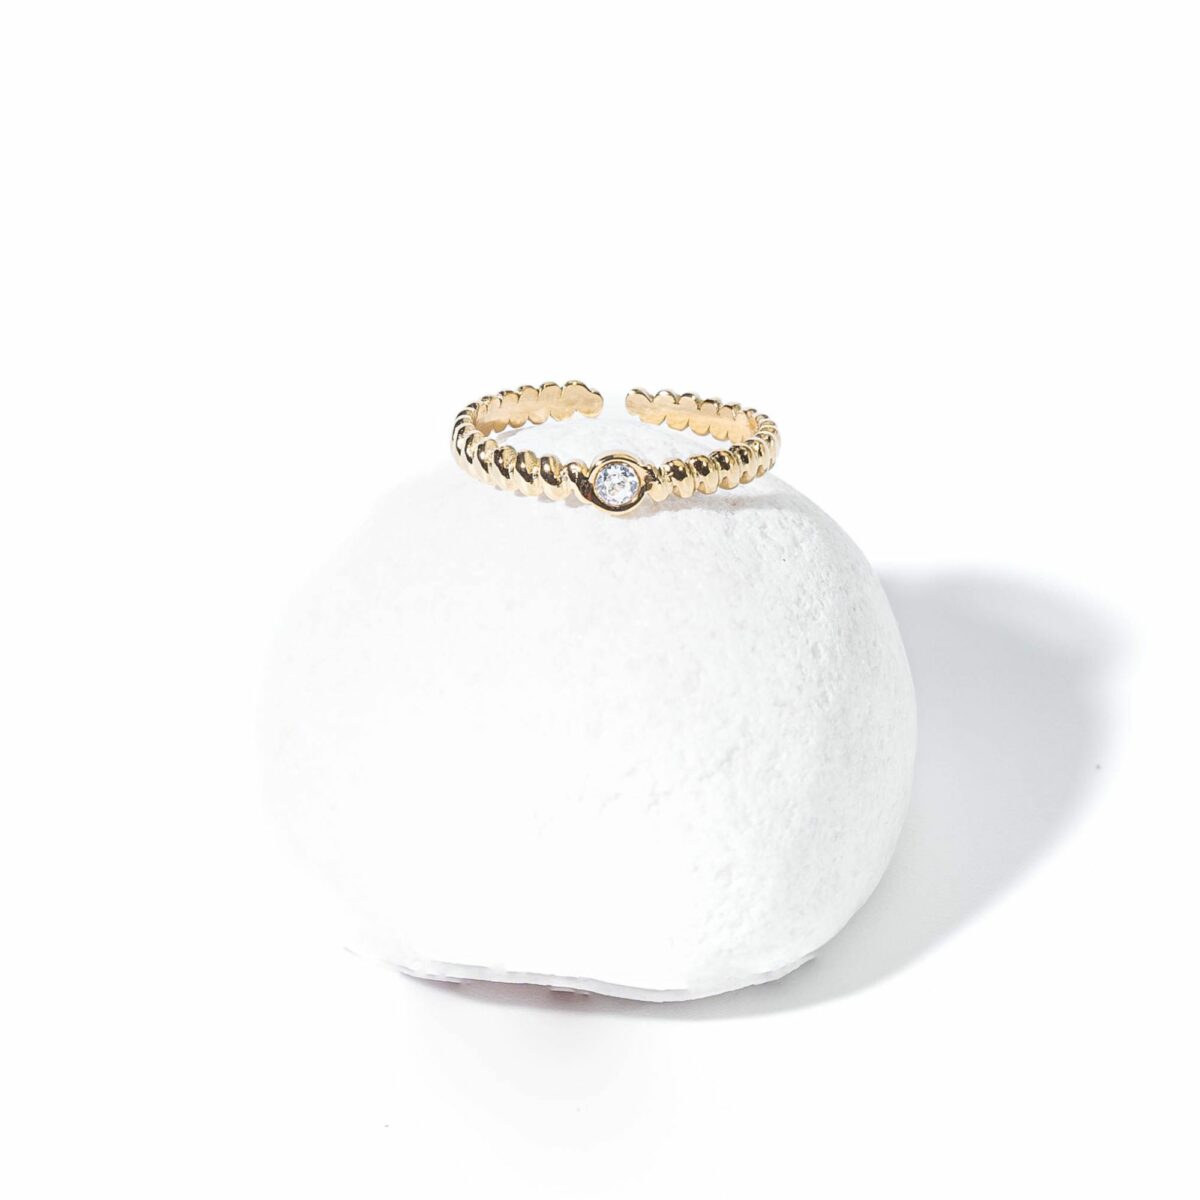 https://m.clubbella.co/product/gold-solitaire-wavy-ring/ DSC00364-Edit